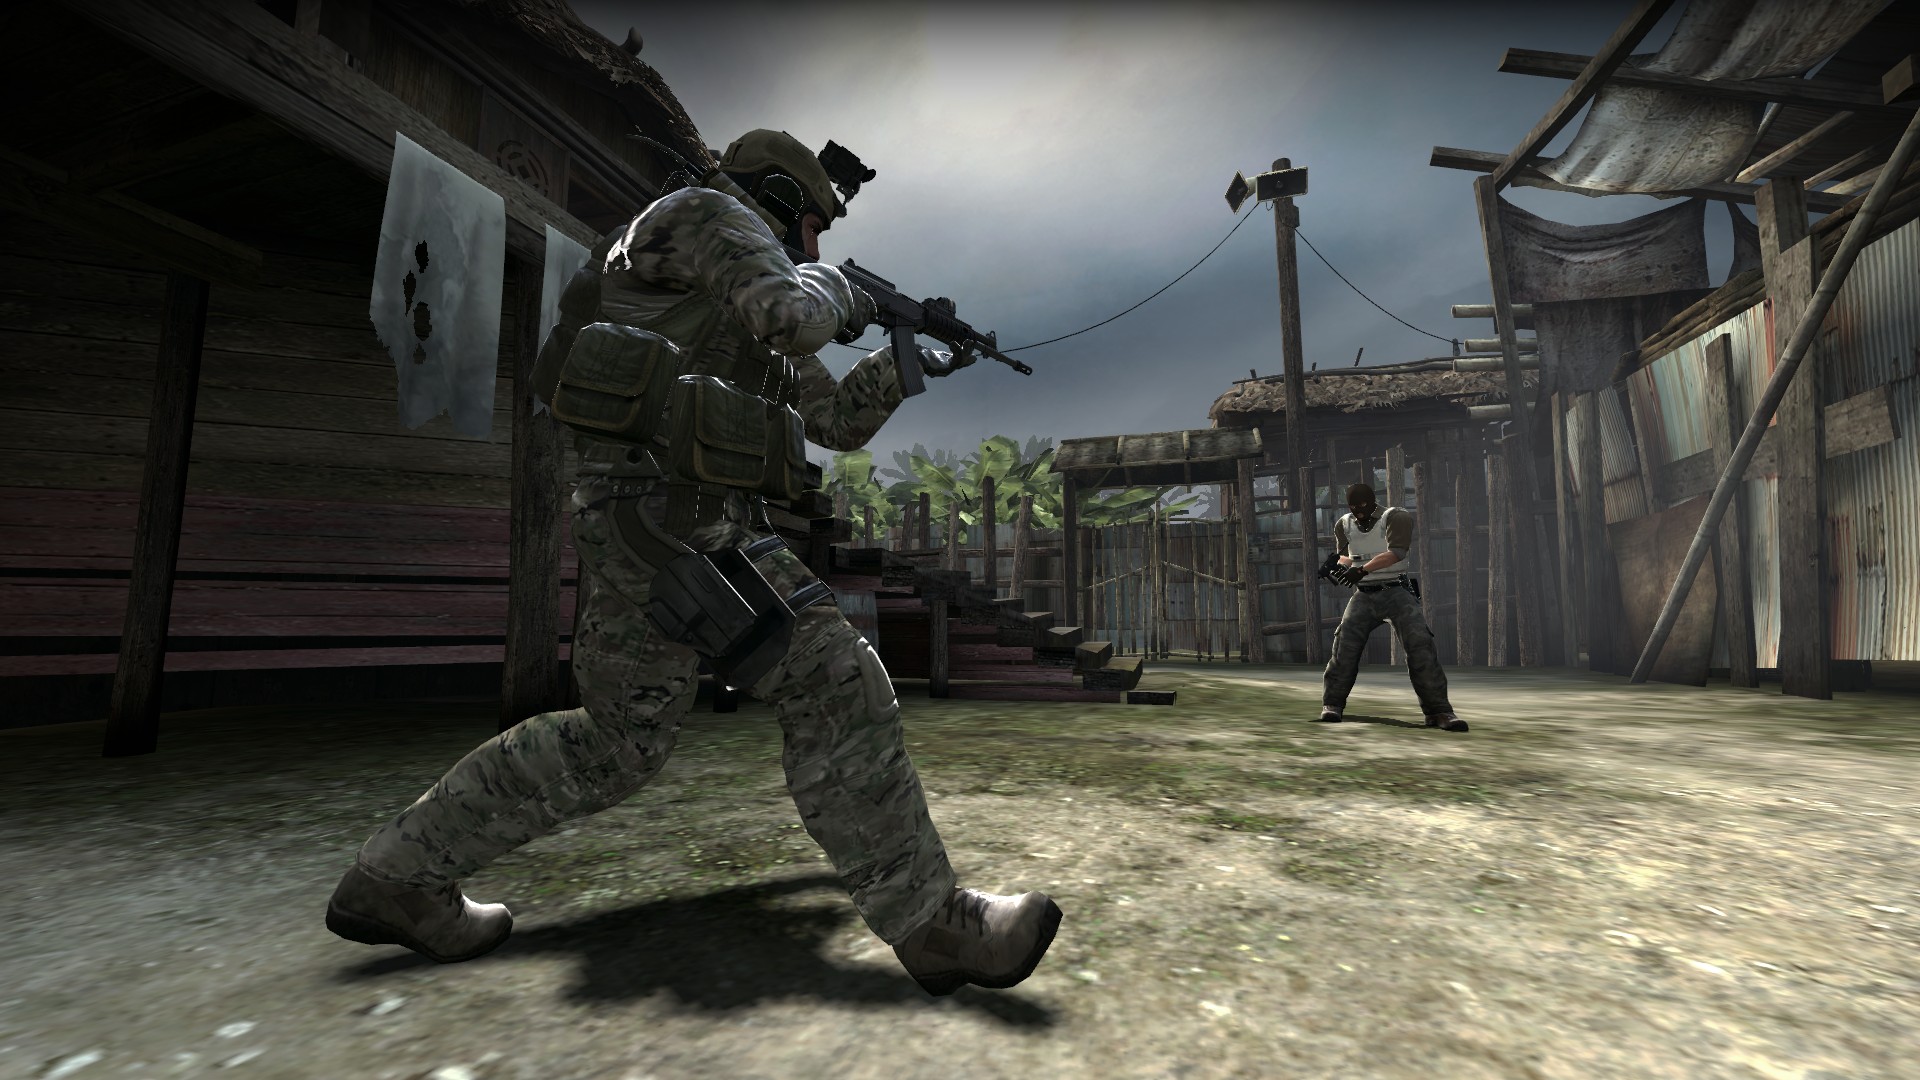 file_1313_counter-strike-global-offensive-arsenal-mode-4